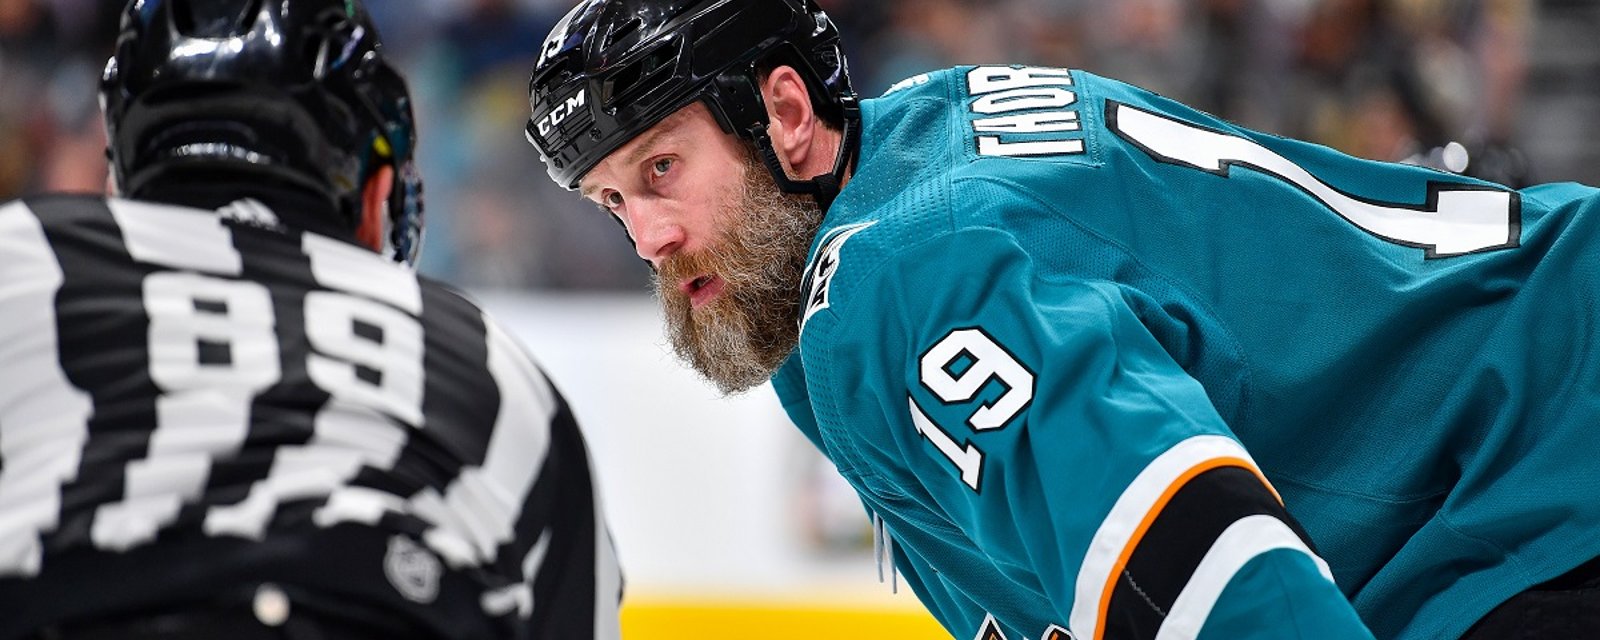 Breaking: Joe Thornton headed for a playoff suspension.